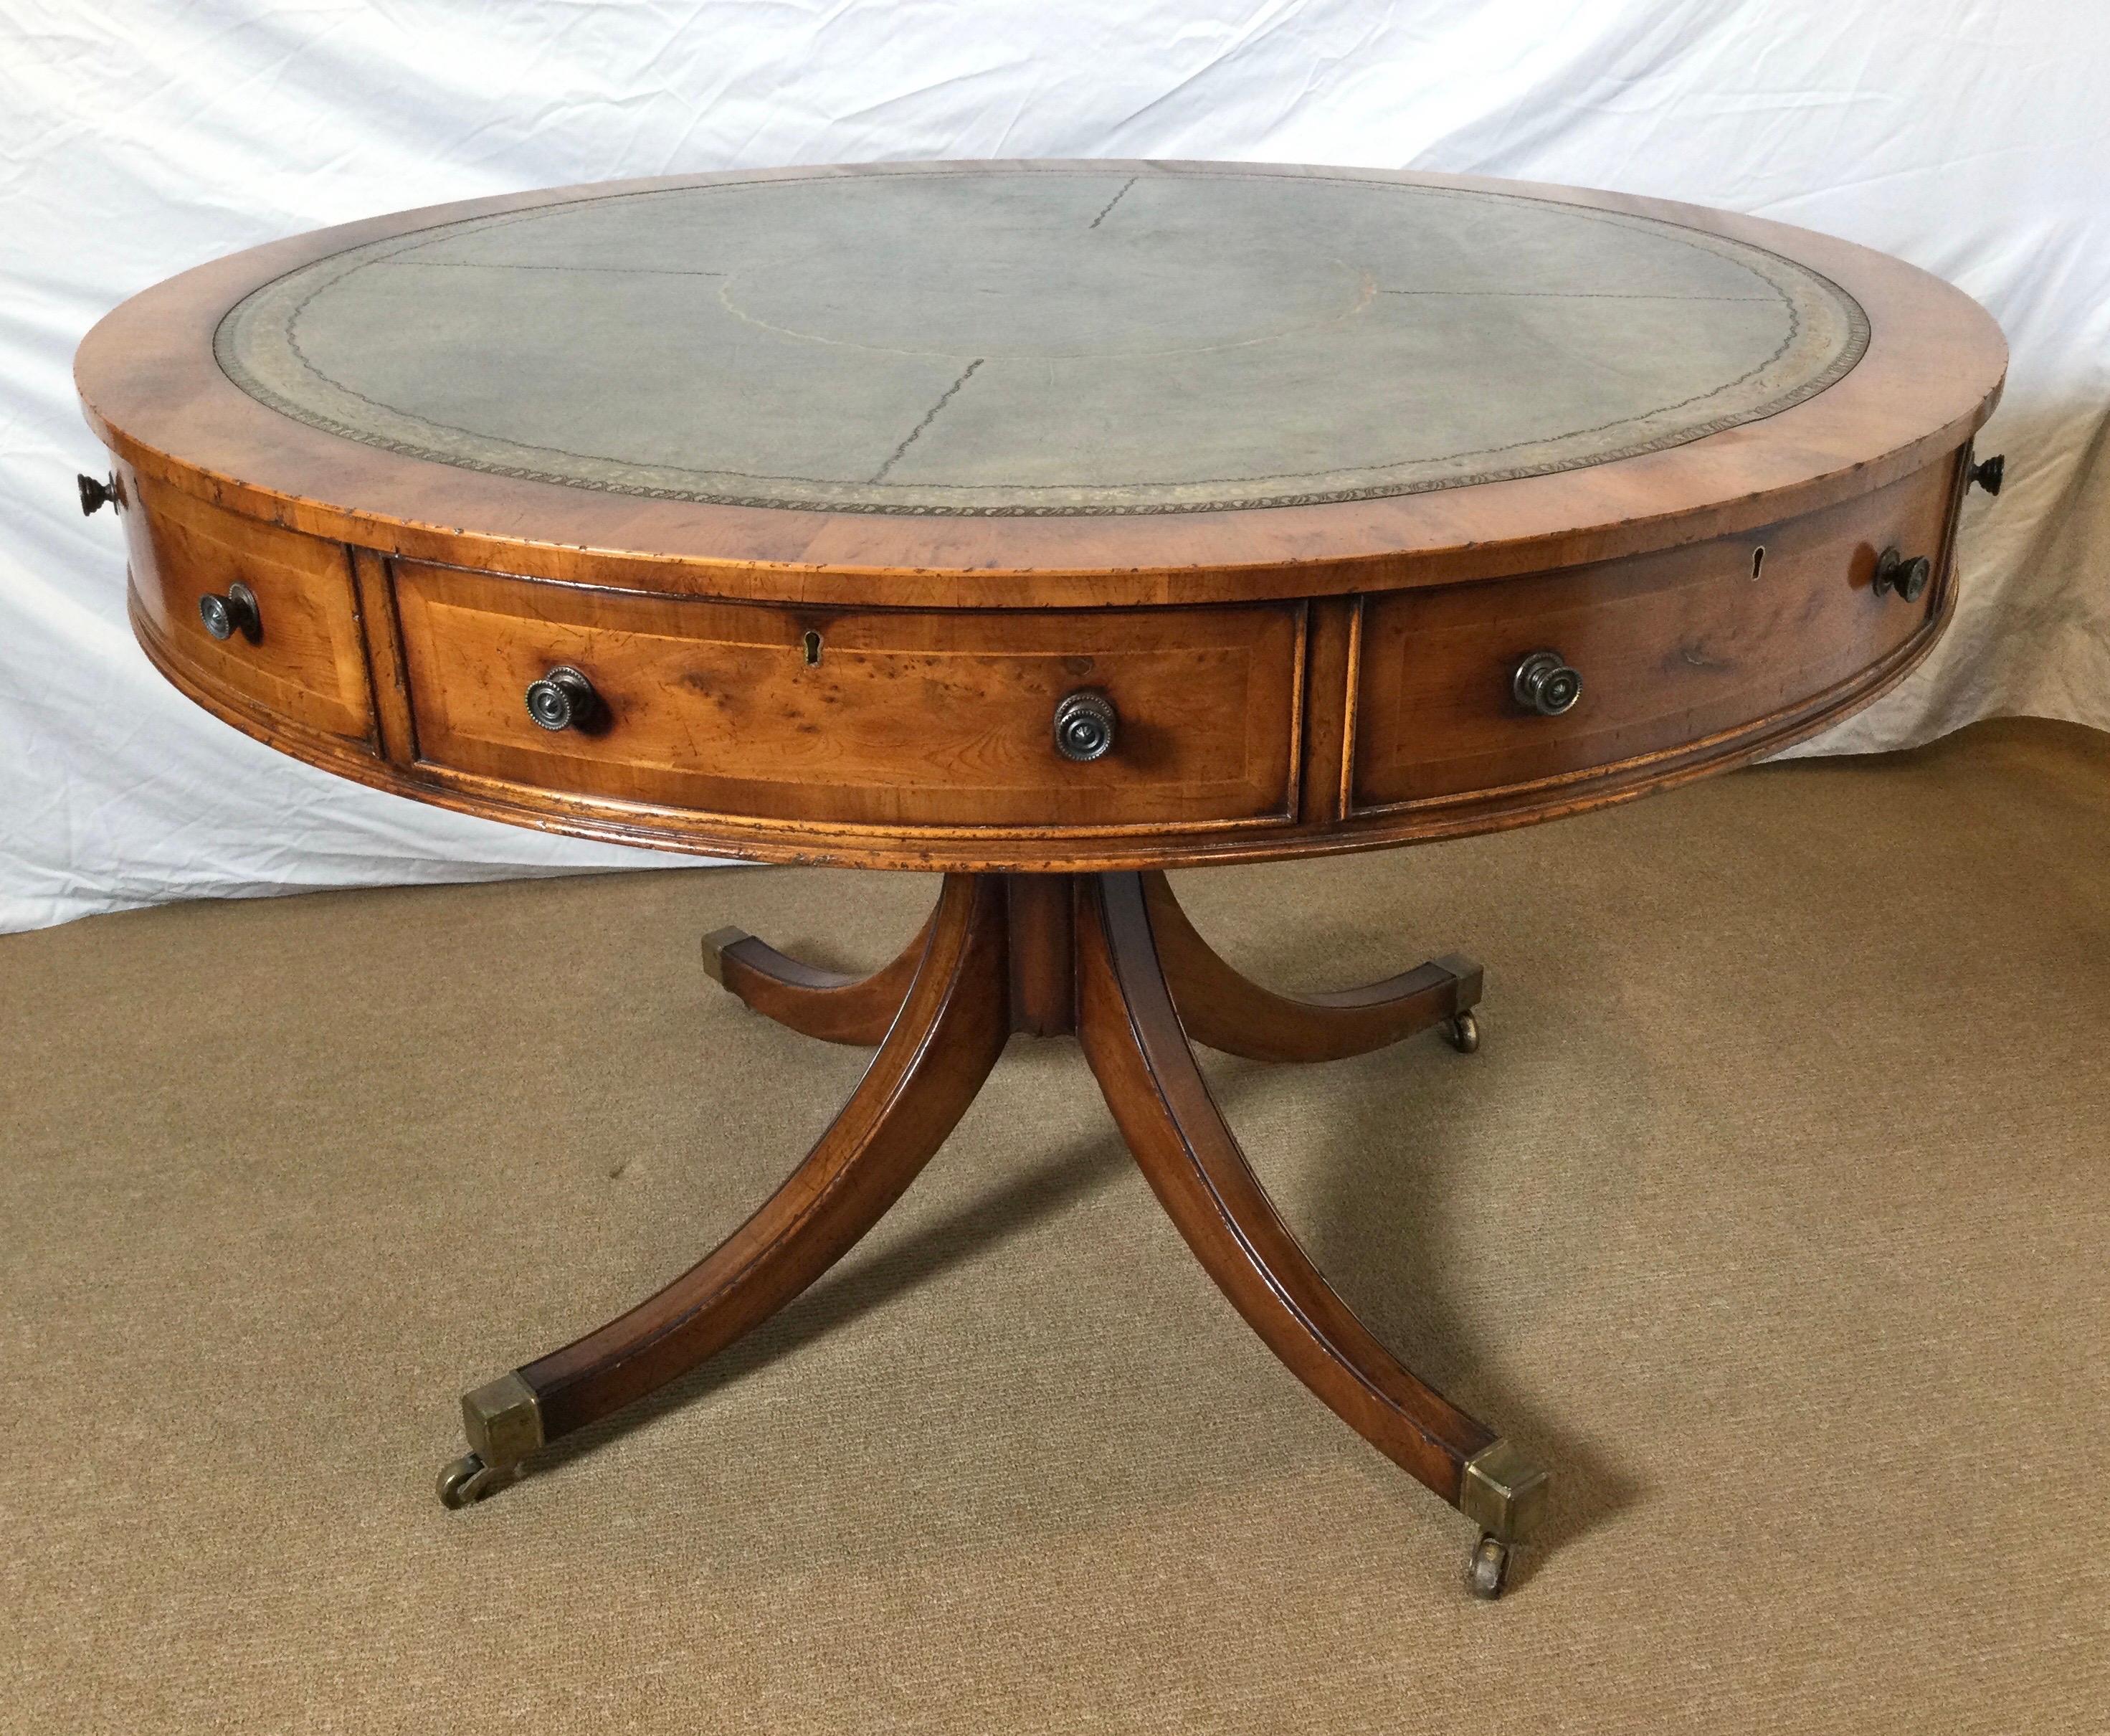 A classic round drum tale with medium olive tooled leather top. The thick apron with four working drawers and four fixed drawer fronts on a pedestal base with four splayed legs resting on brass castors. The wood is a smoky medium color Yew wood with